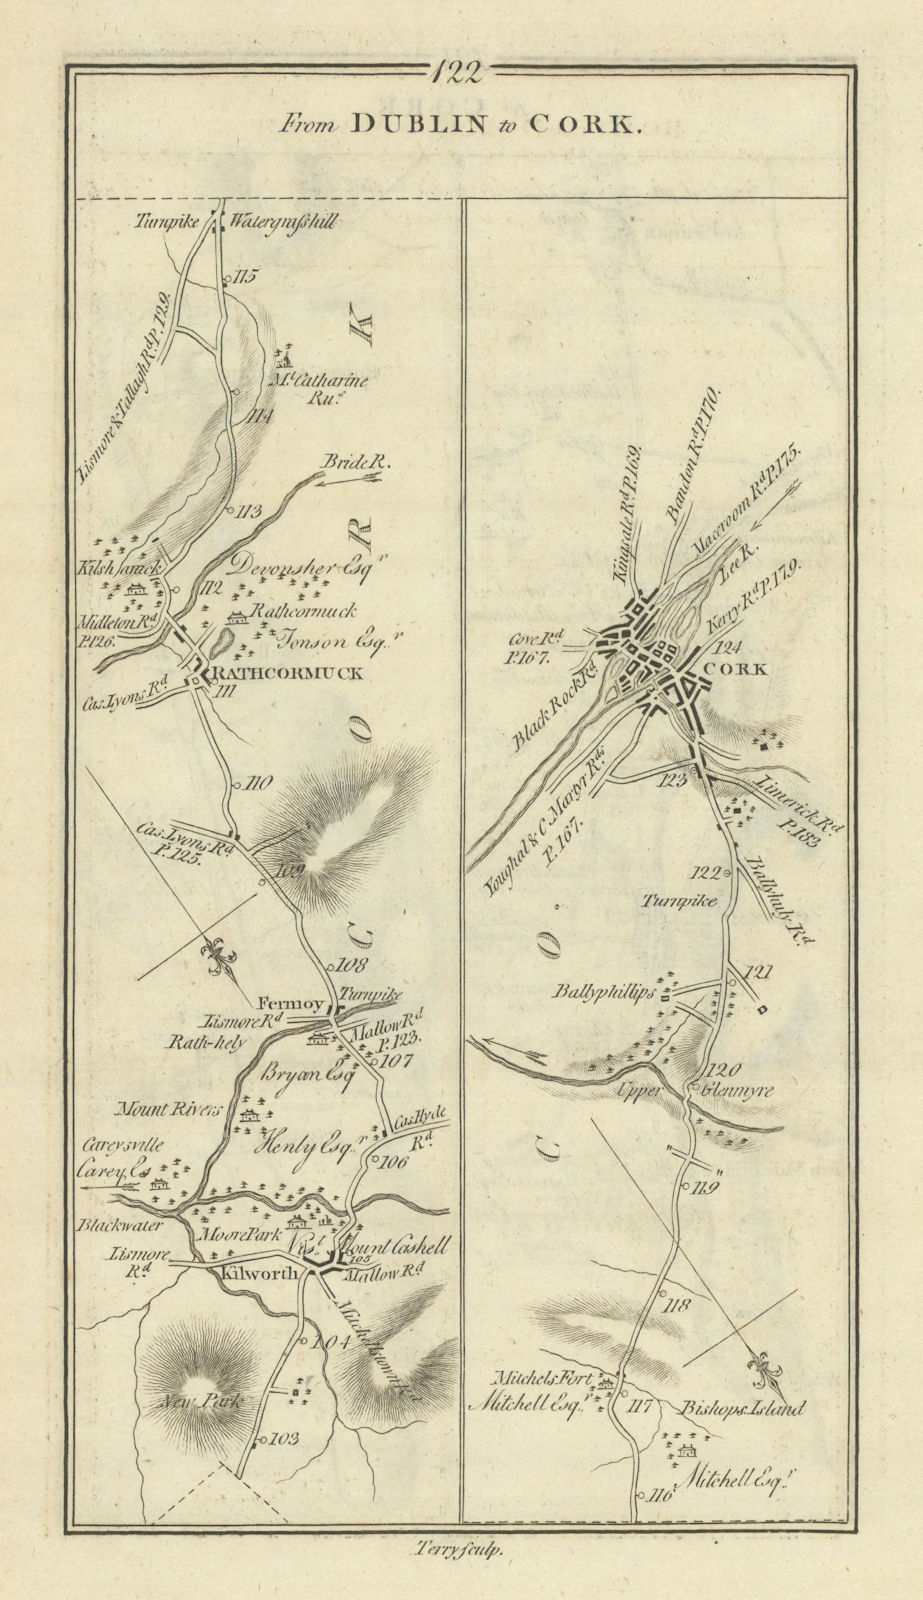 Associate Product #122 Dublin to Cork. Rathcormac Fermoy Kilworth. TAYLOR/SKINNER 1778 old map